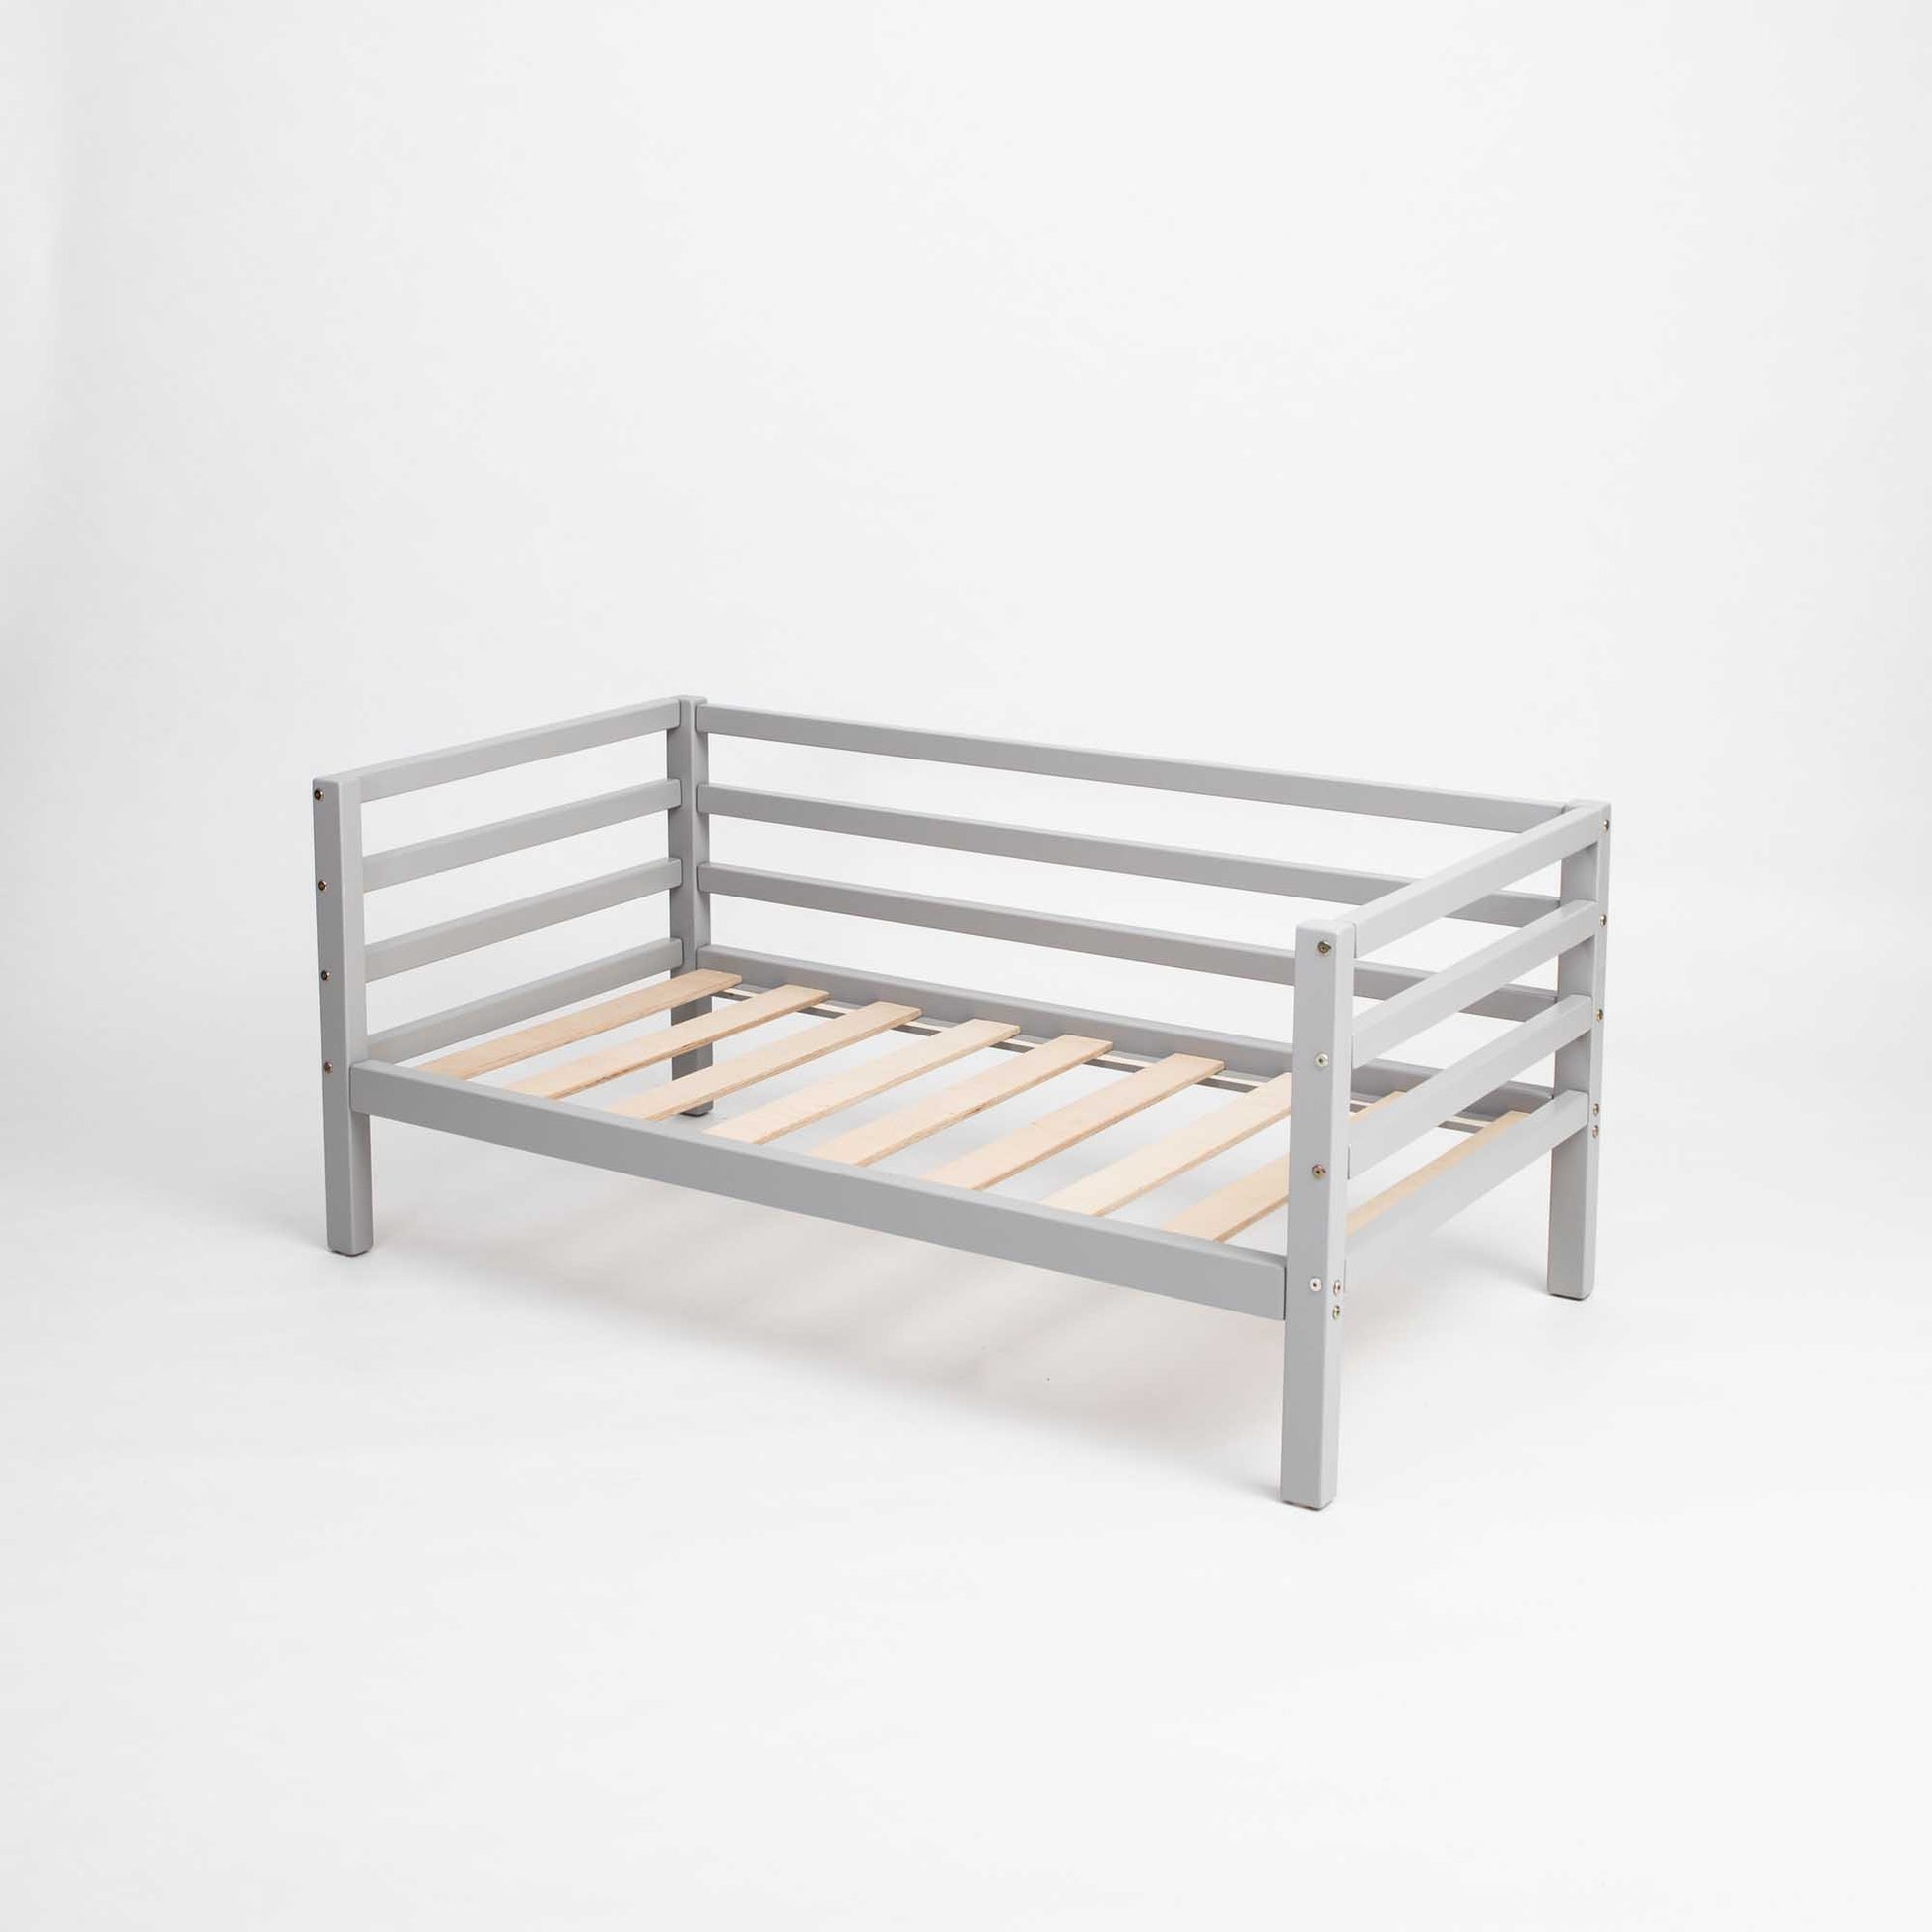 A 2-in-1 transformable kids' bed with a 3-sided horizontal rail from Sweet Home From Wood, with wooden slats against a white background, suitable as a child's bed.